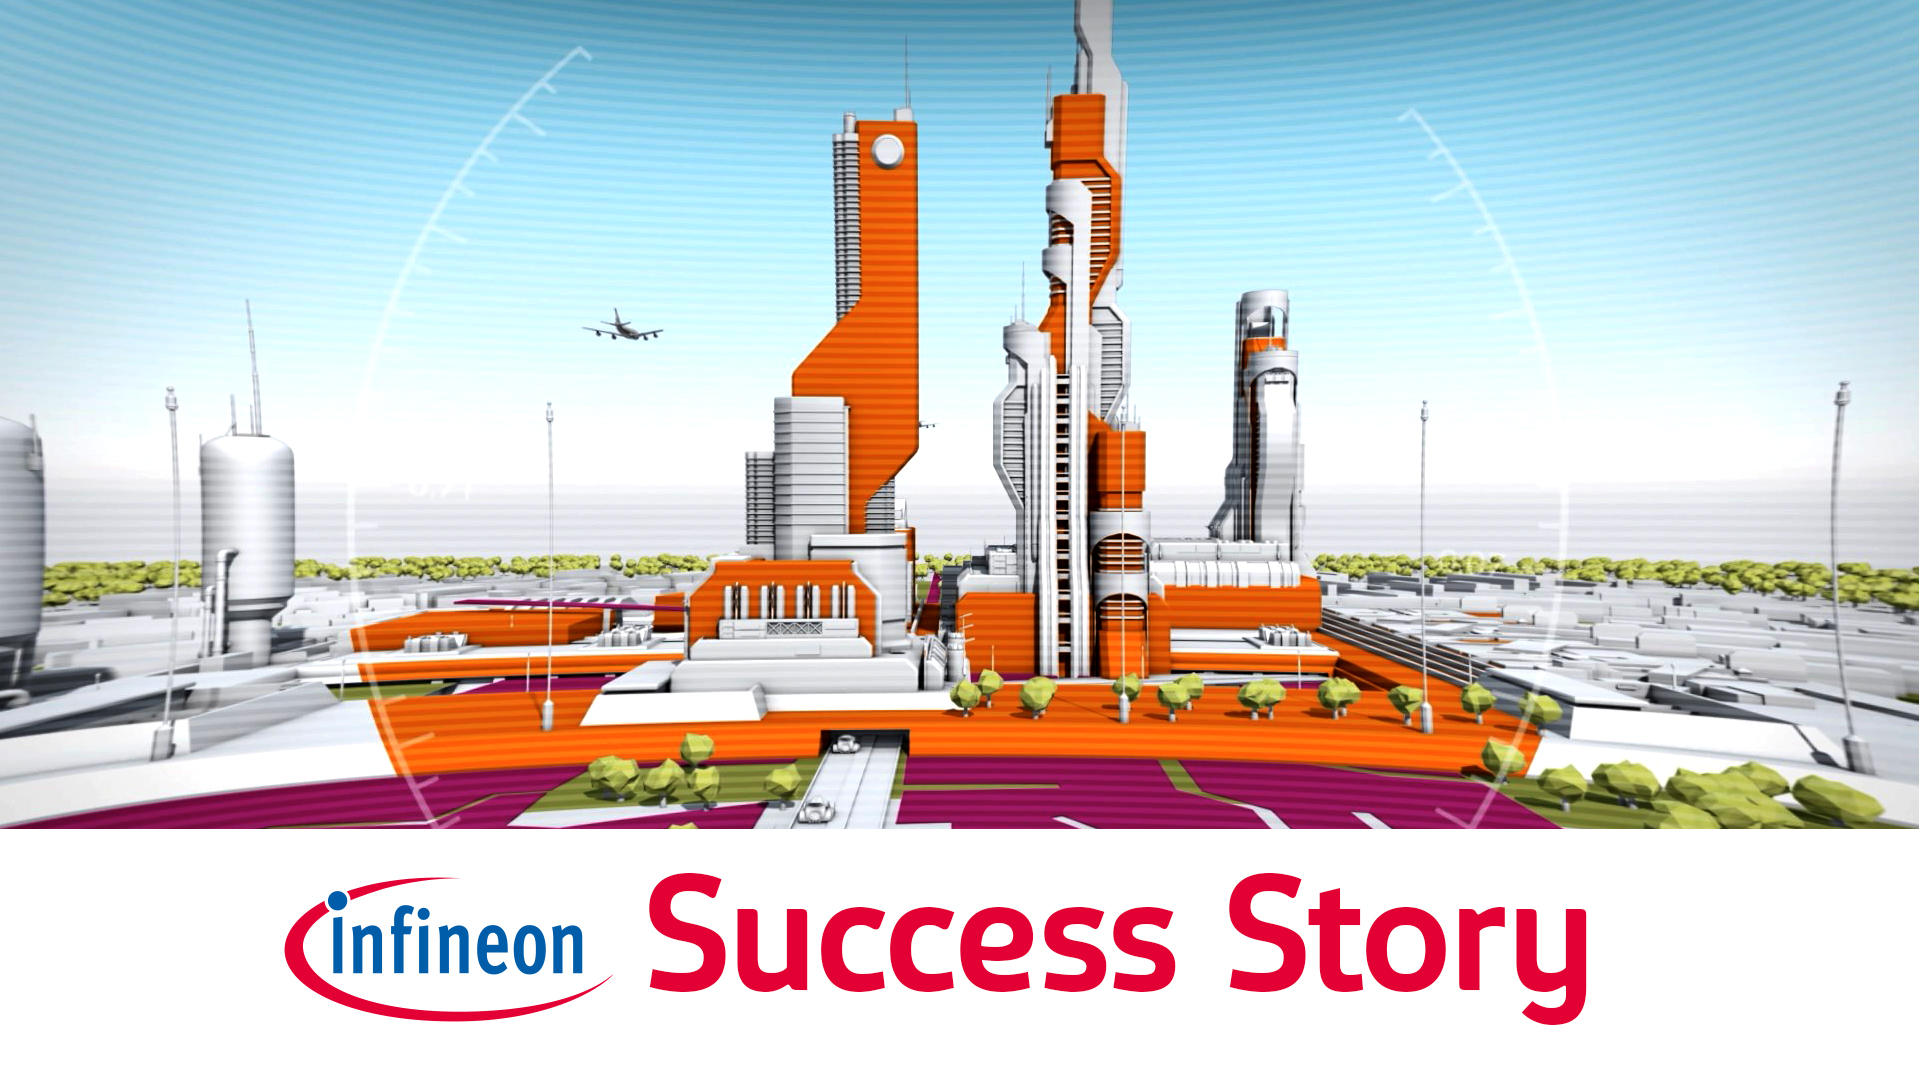 SUCCESS STORY of Infineon | 3D Animated Video